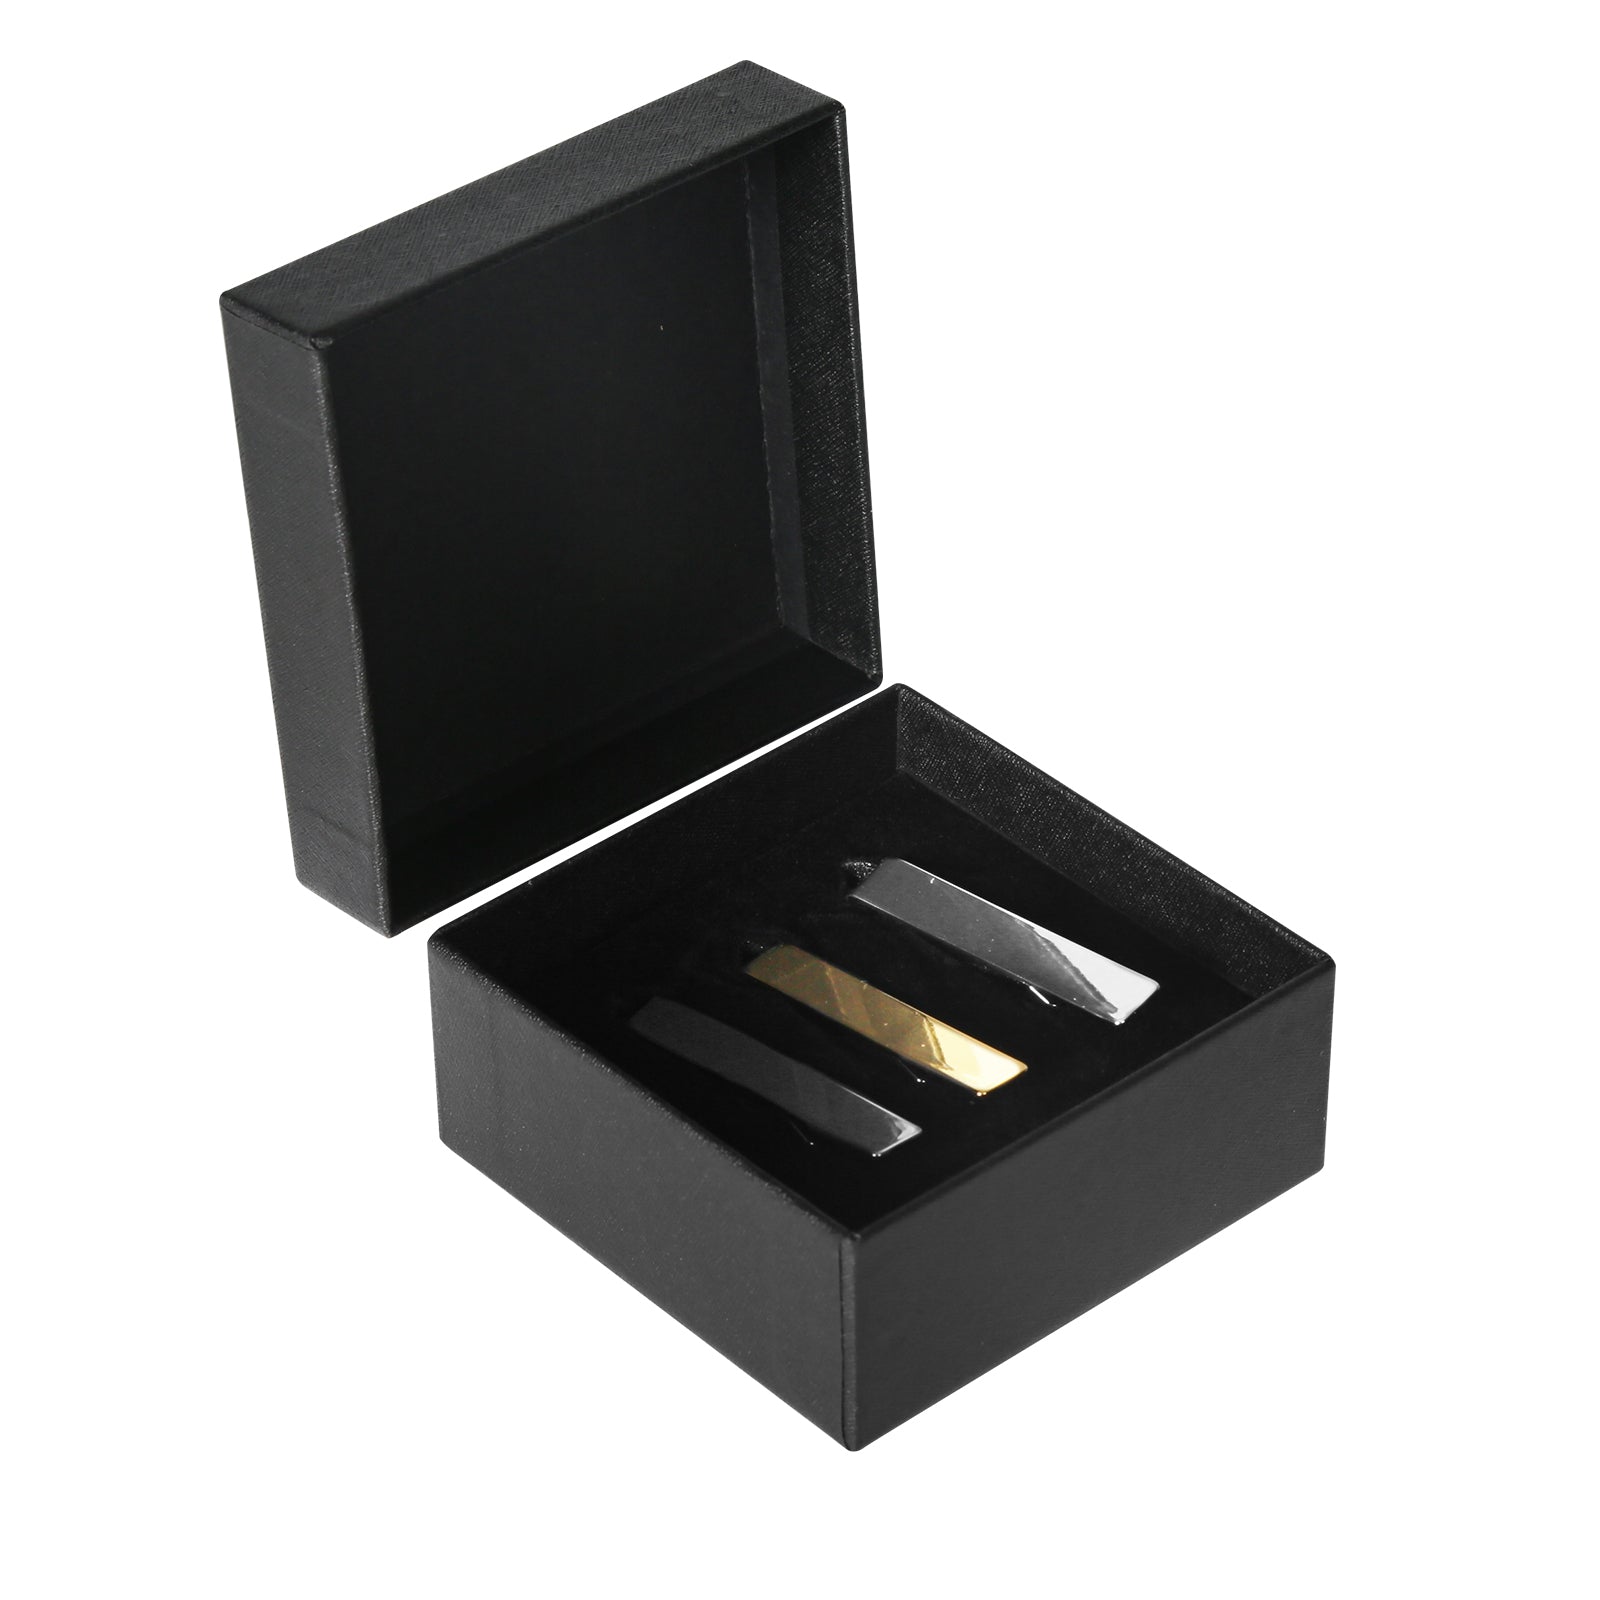 Personalized Tie Clip Stainless Steel Custom Engraved Tie Clips for Men Gift with Gift Box